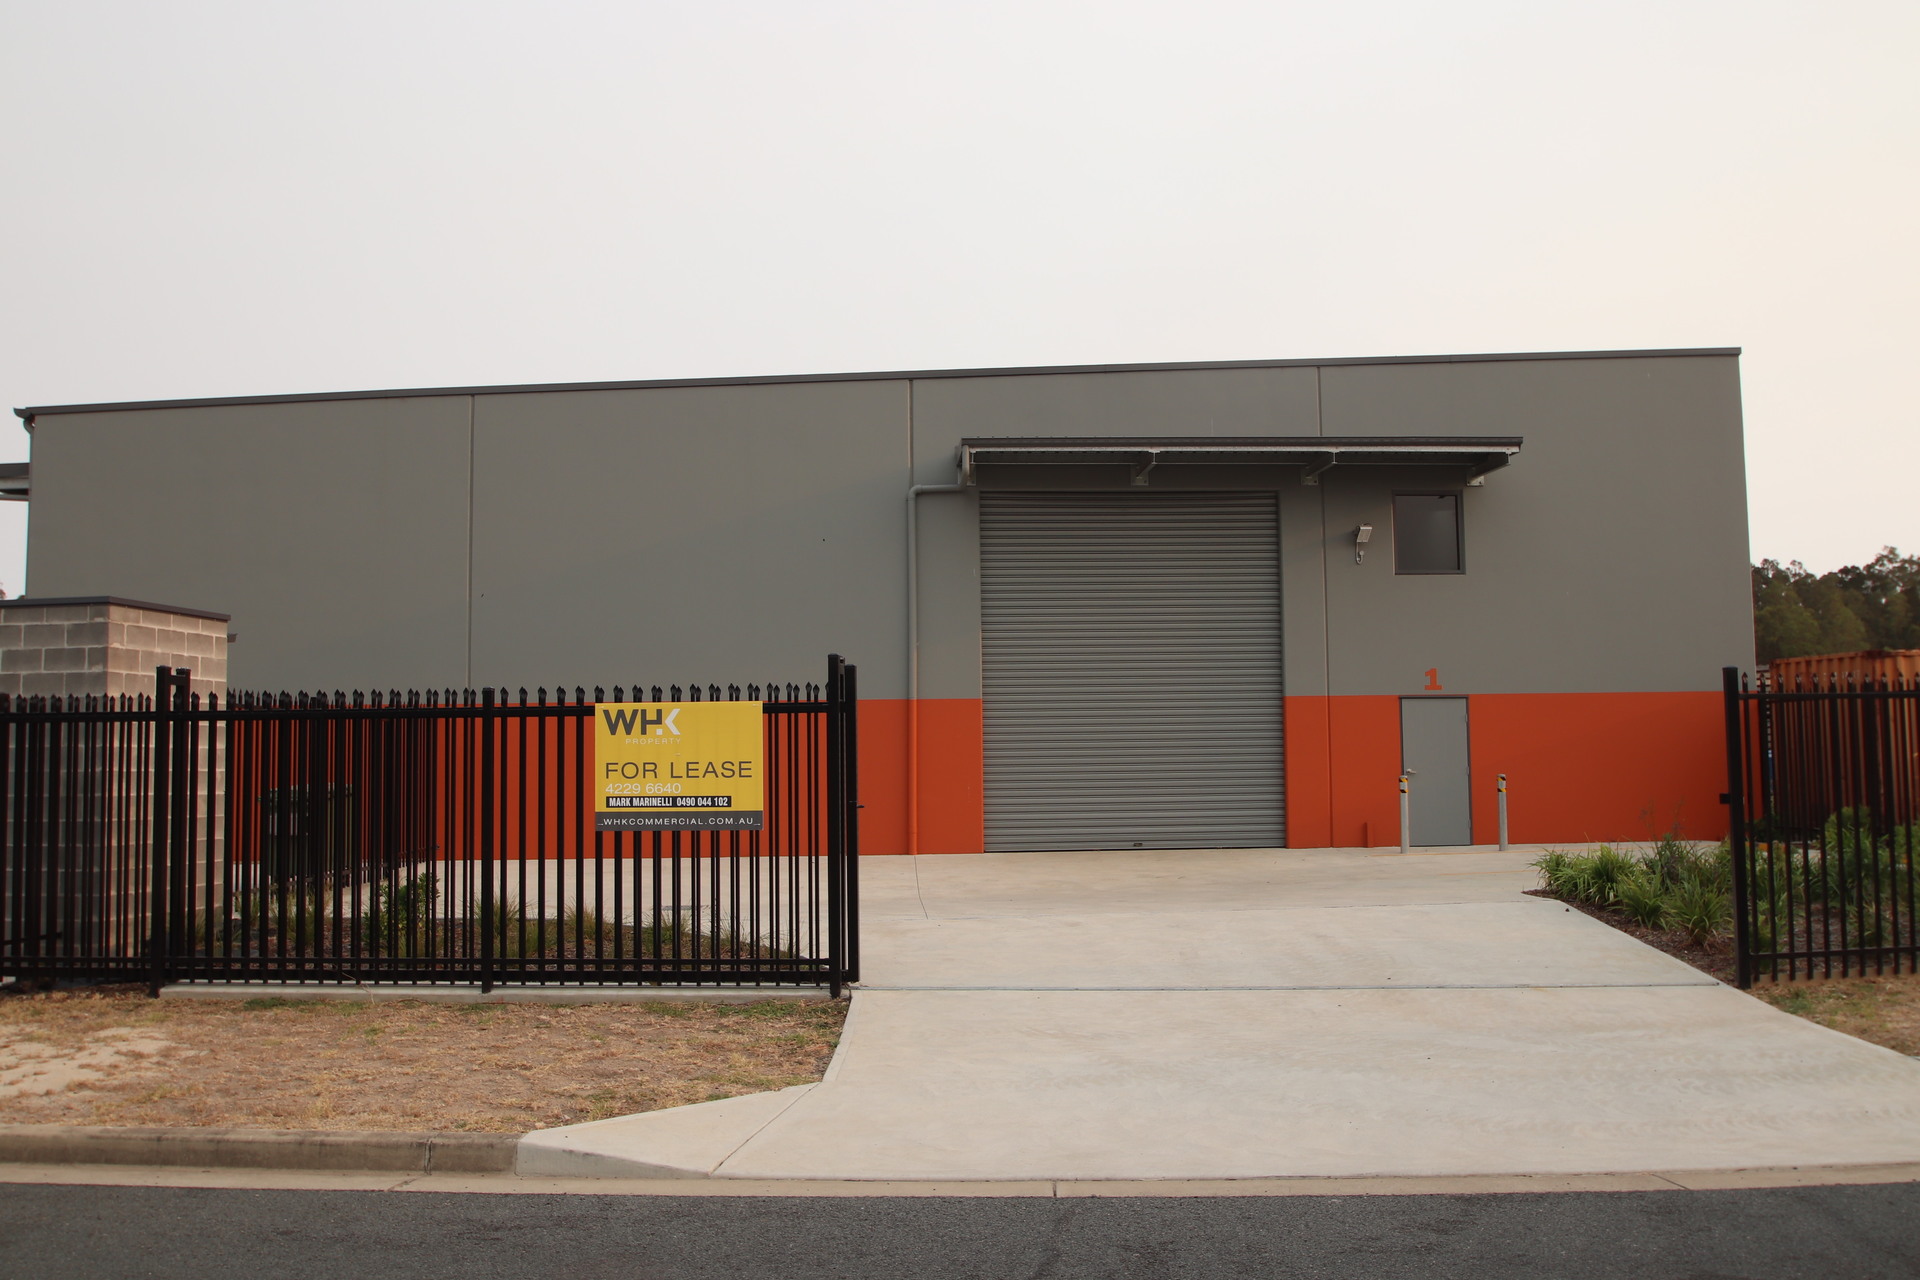 BRAND NEW INDUSTRIAL UNIT